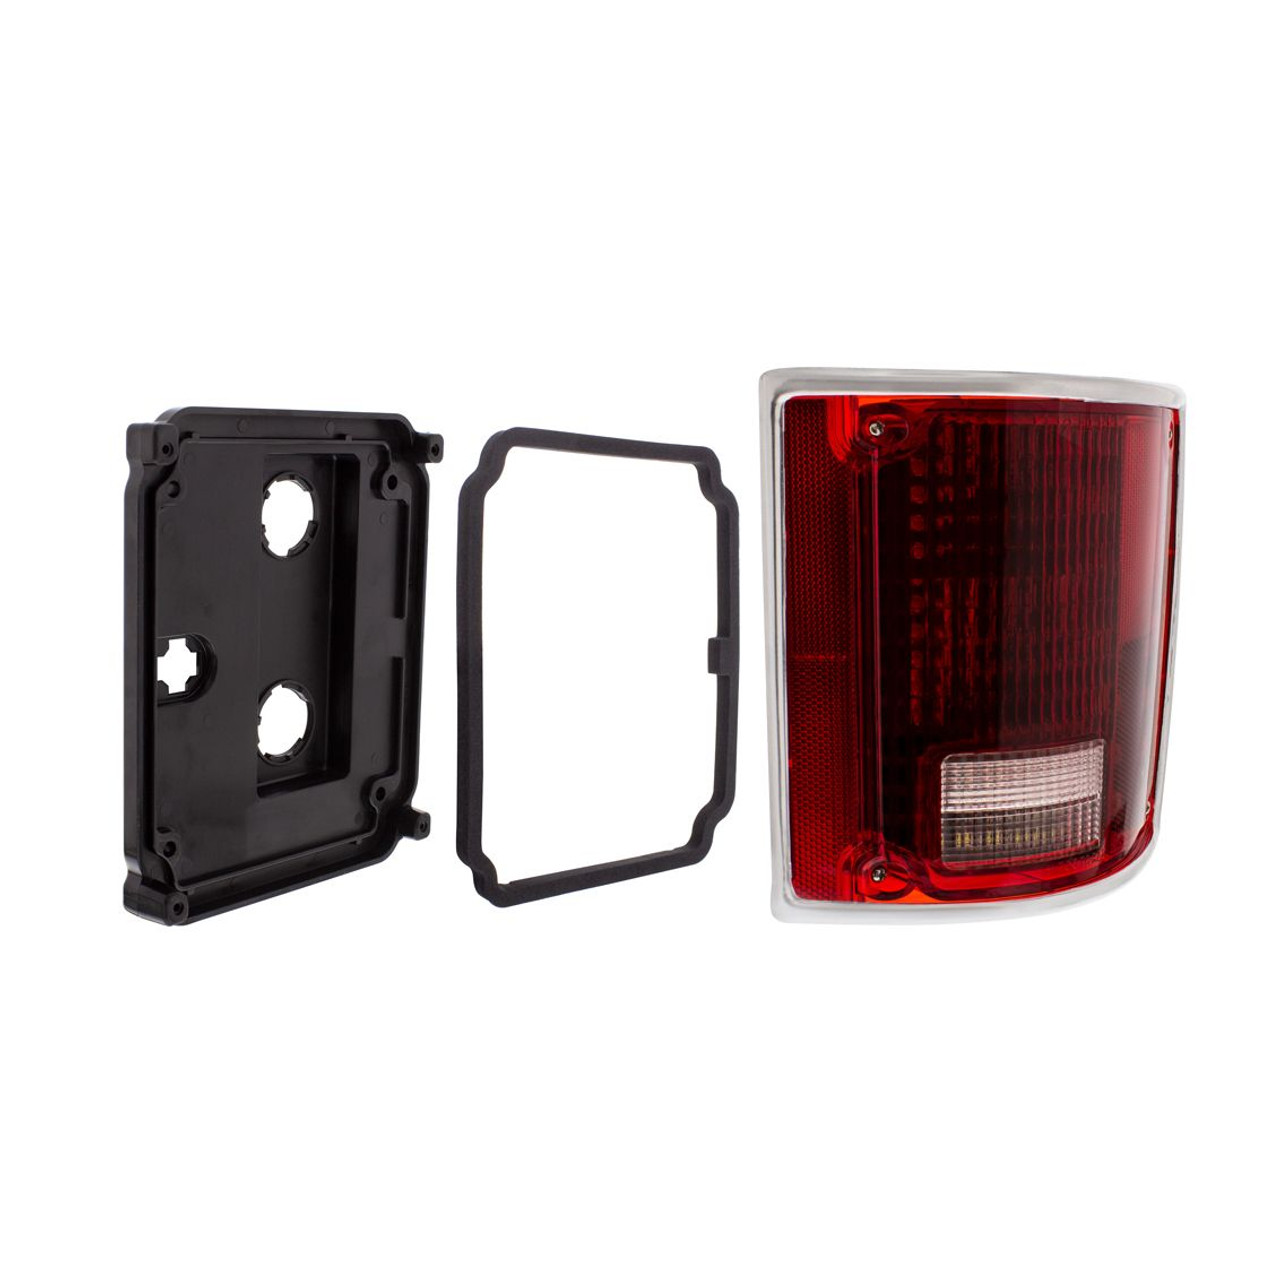 United Pacific  LED Sequential Tail Light With Trim For 1973-87 Chevy & GMC Truck - R/H